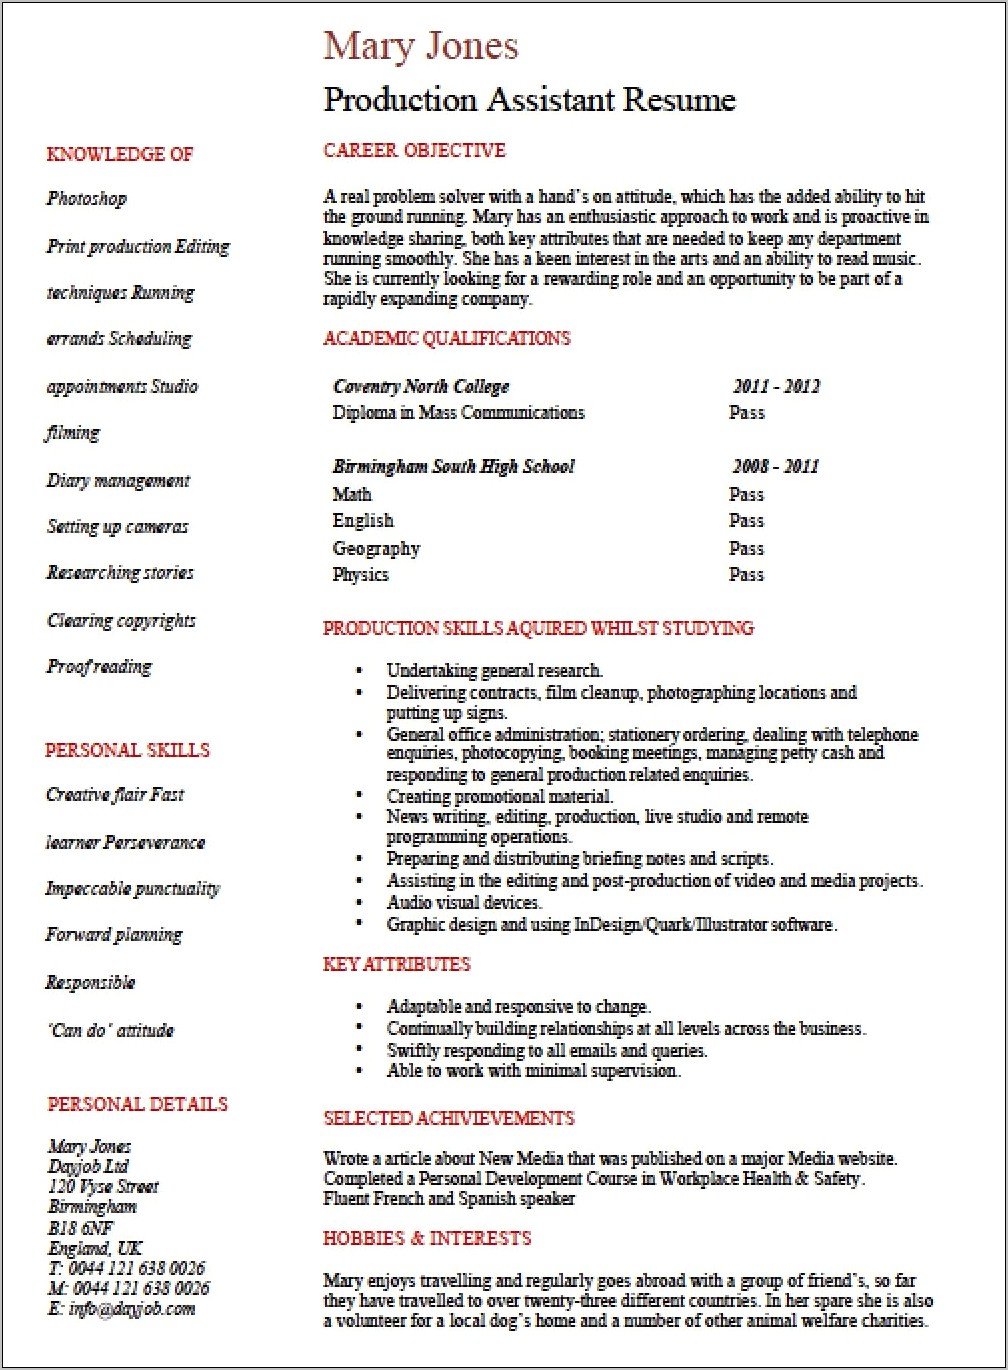 Film Production Assistant Resume Objective Sample